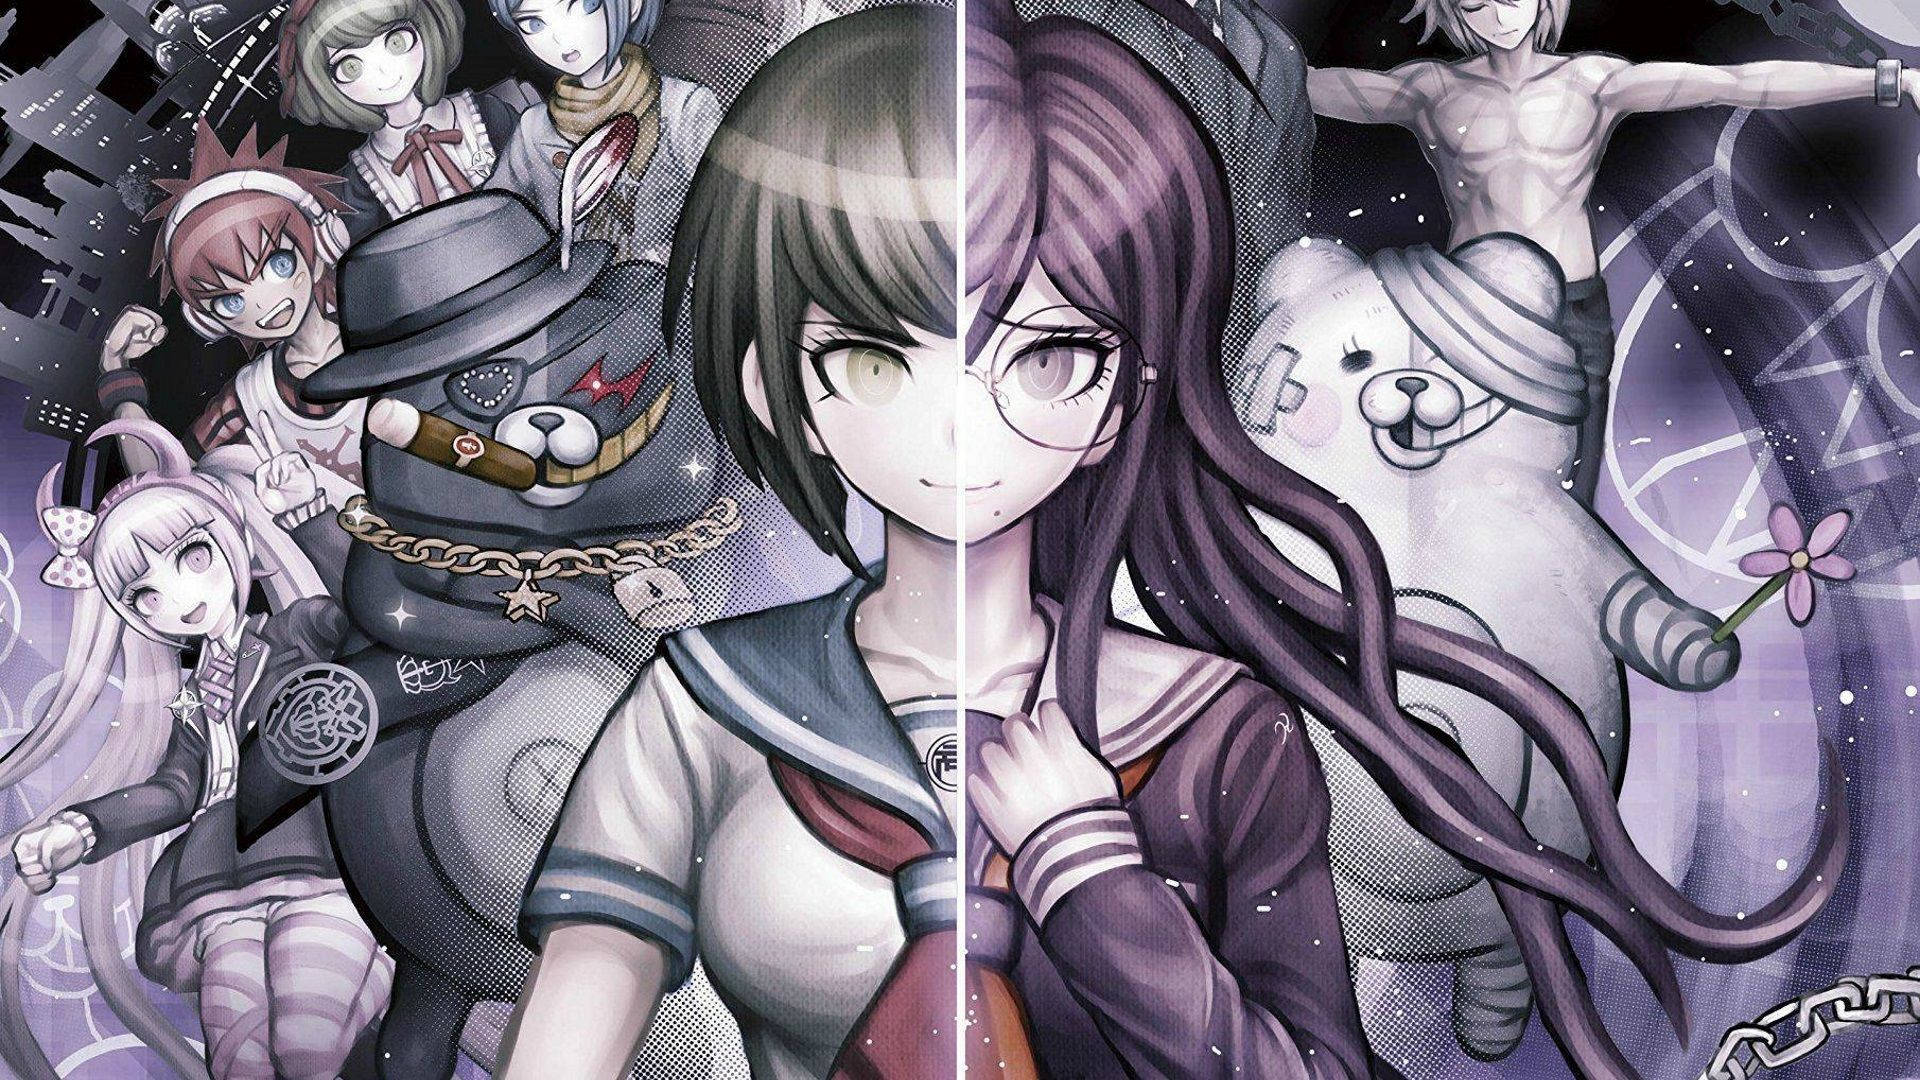 An array of colorful, eccentric characters await in the world of Danganronpa Wallpaper